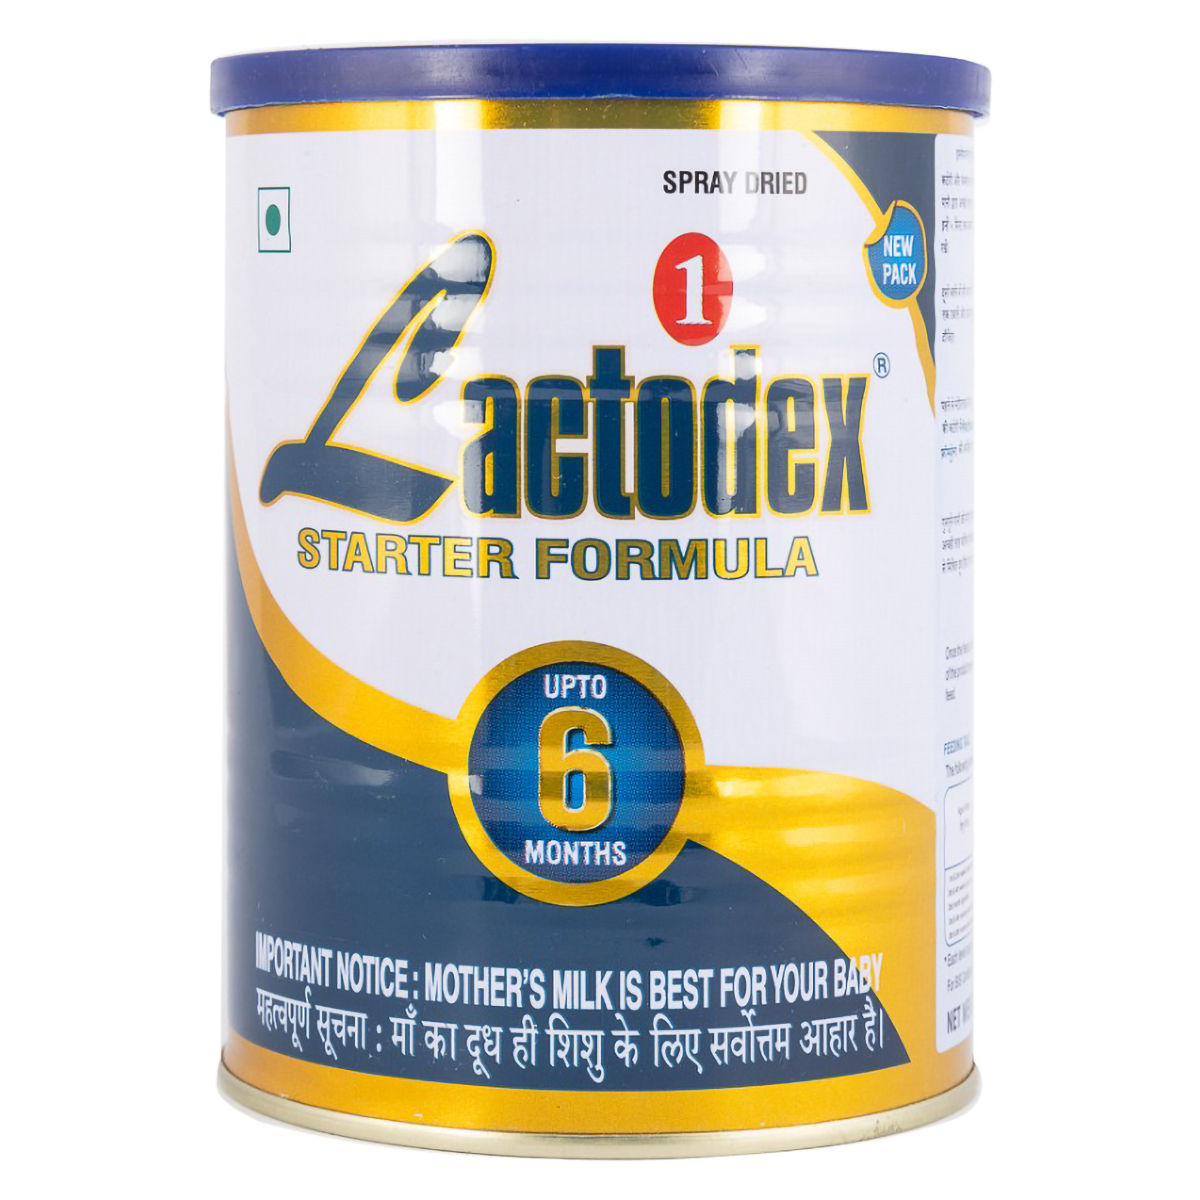 Lactodex Starter Formula Stage 1 Powder for Up to 6 Months, 500 gm, Pack of 1 